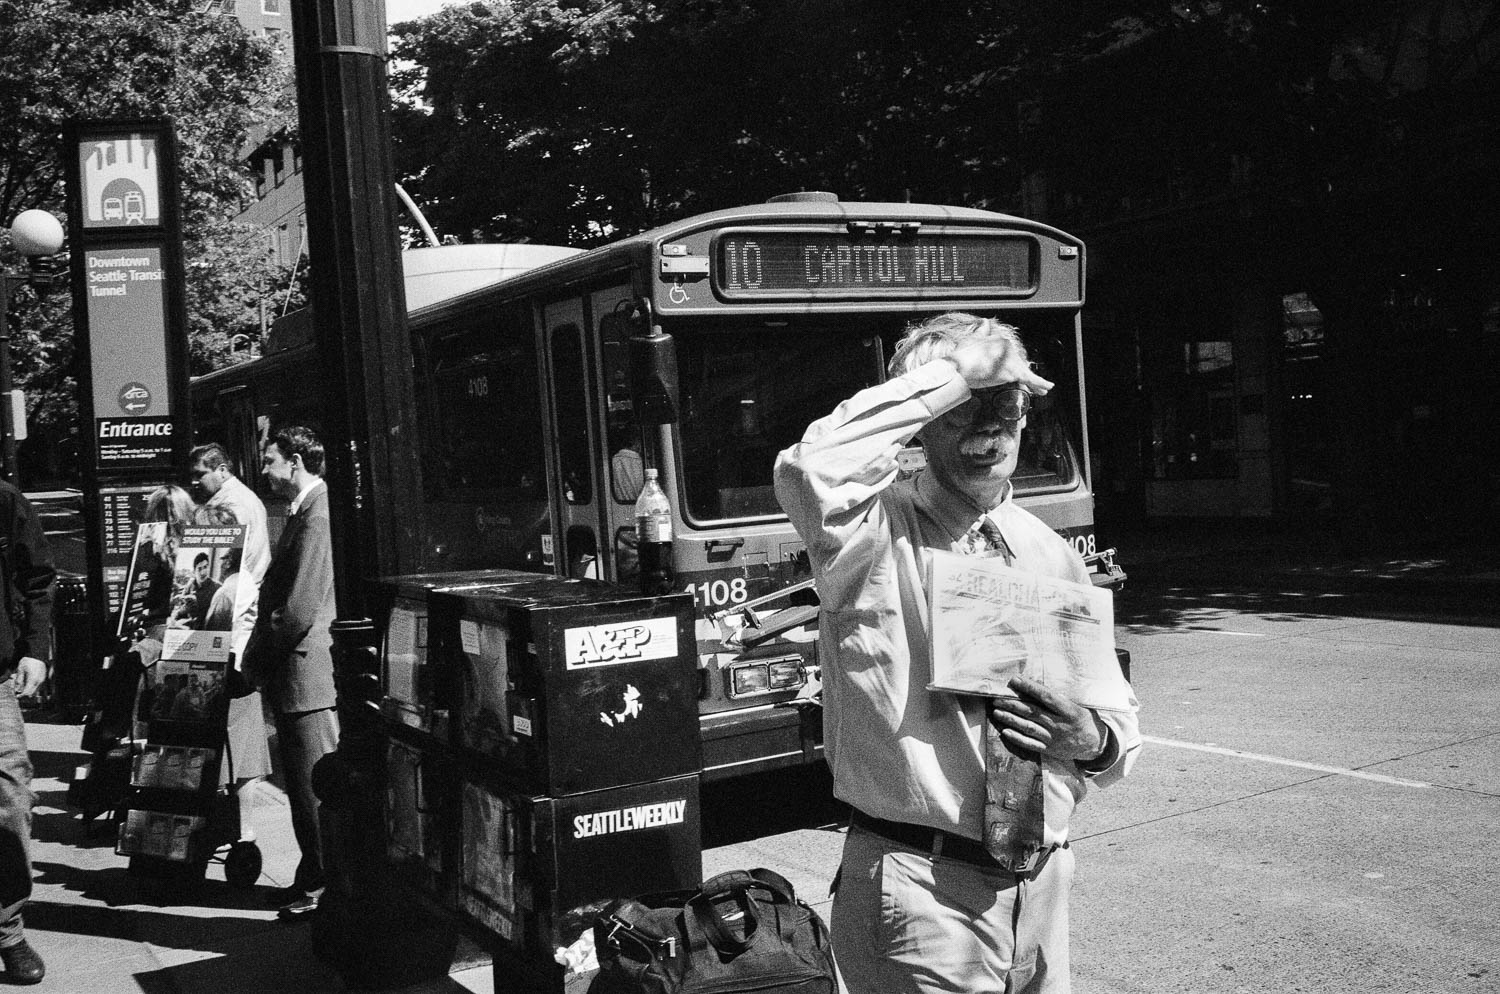 A Seattle man shielding his eyes from the sun while holding a newspaper in front of a city bus